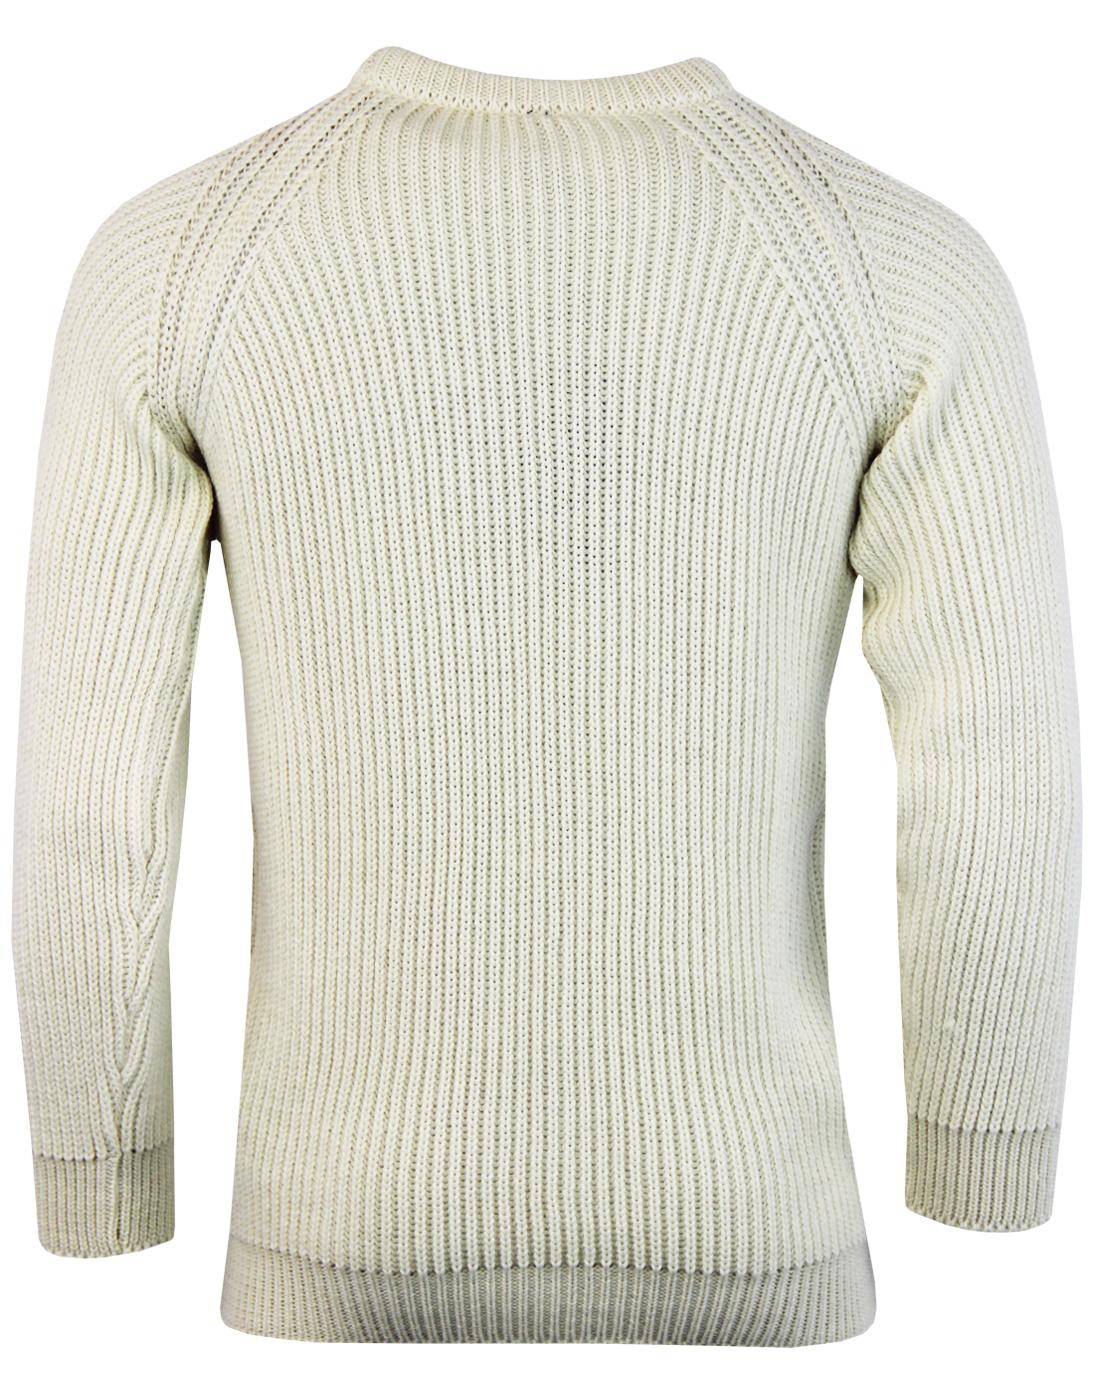 GLOVERALL Made in England Wool Blend Rib Knit Fisherman Jumper